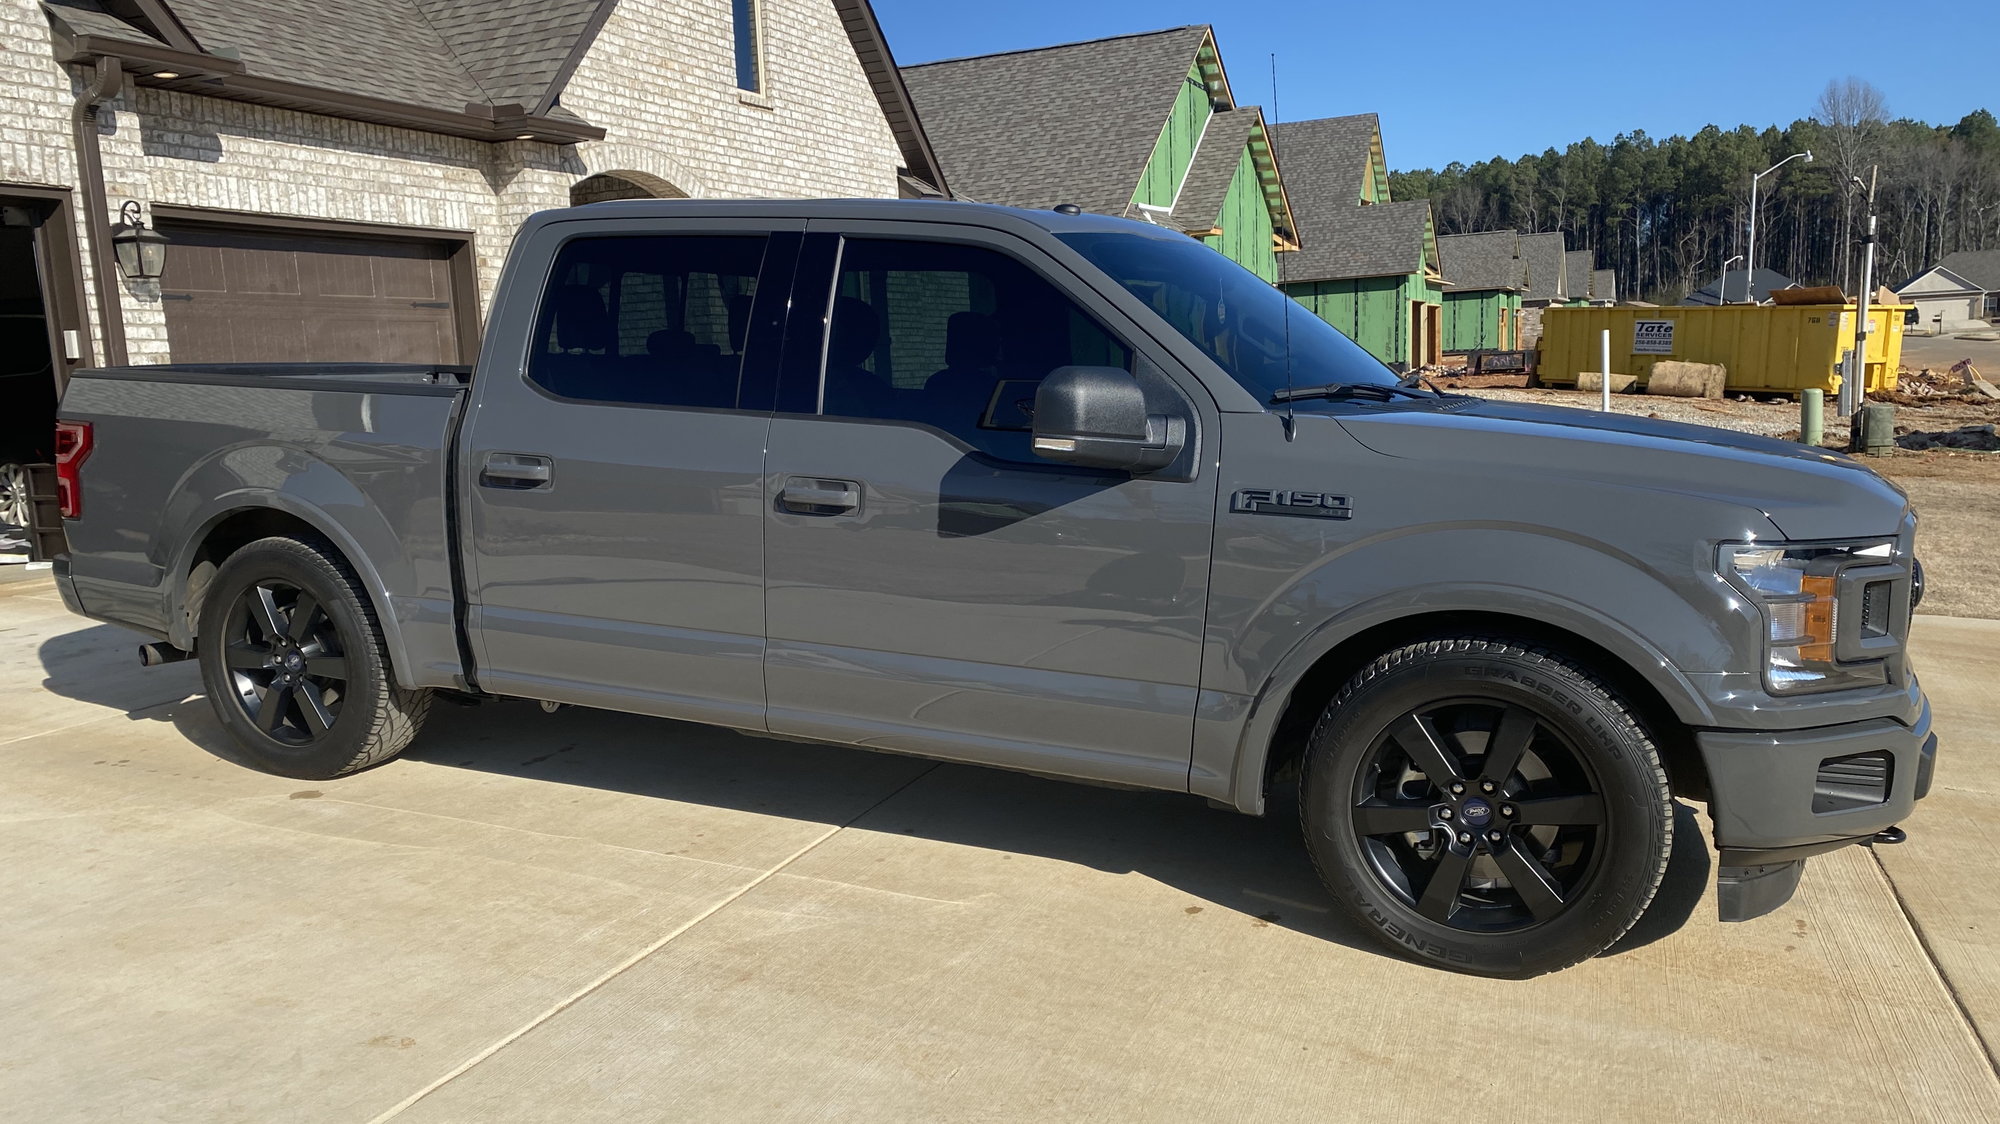 Installed 2 4 Maxtrac Lowering Kit On 18 4x4 Ford F150 Forum Community Of Ford Truck Fans